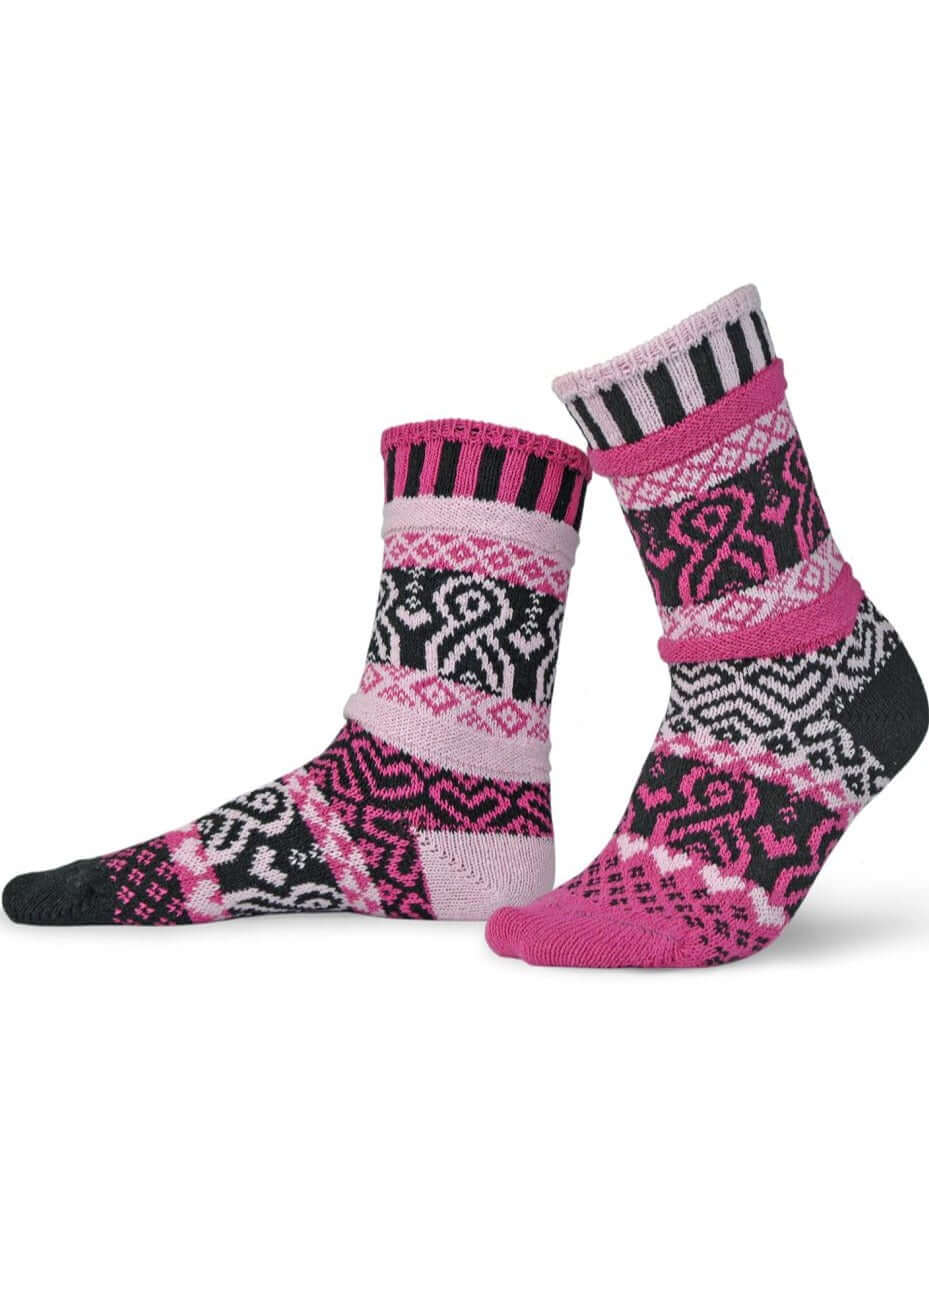 Solmate Socks PINKTOBER Knitted Crew Socks Proudly Made USA | These socks are delightfully mismatched & so very comfortable. American Made Clothing